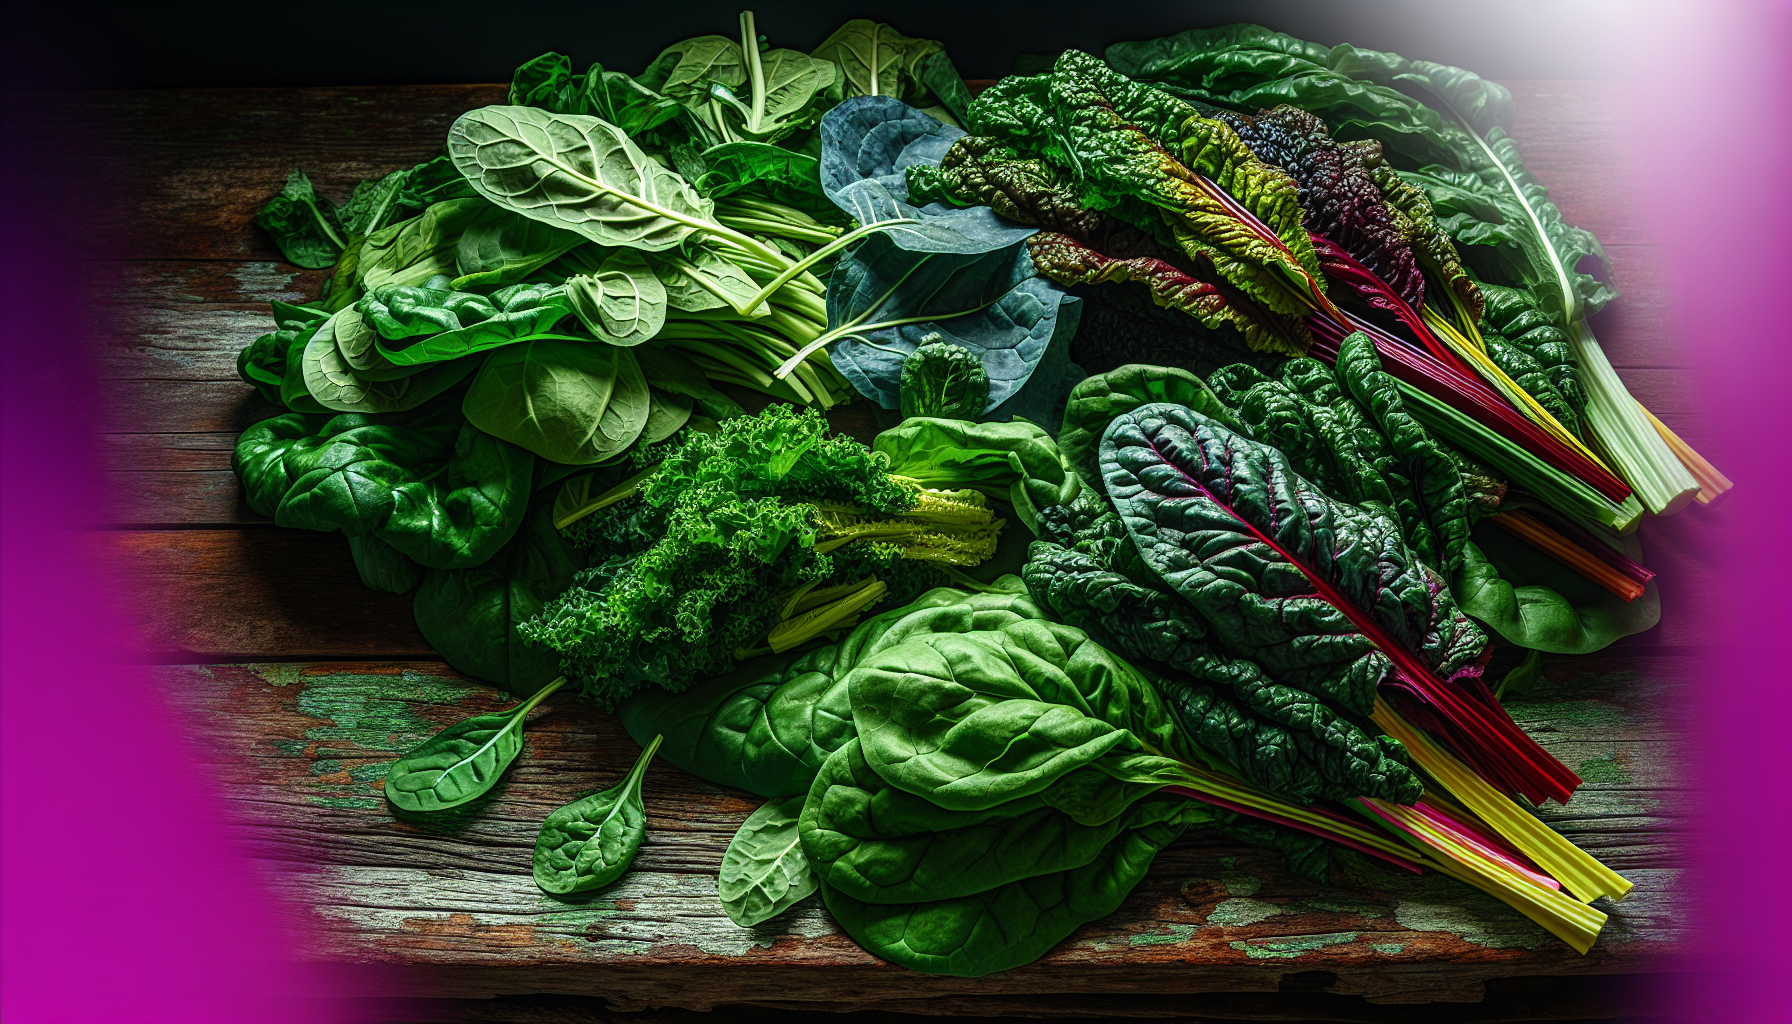 A variety of leafy green vegetables on a wooden table